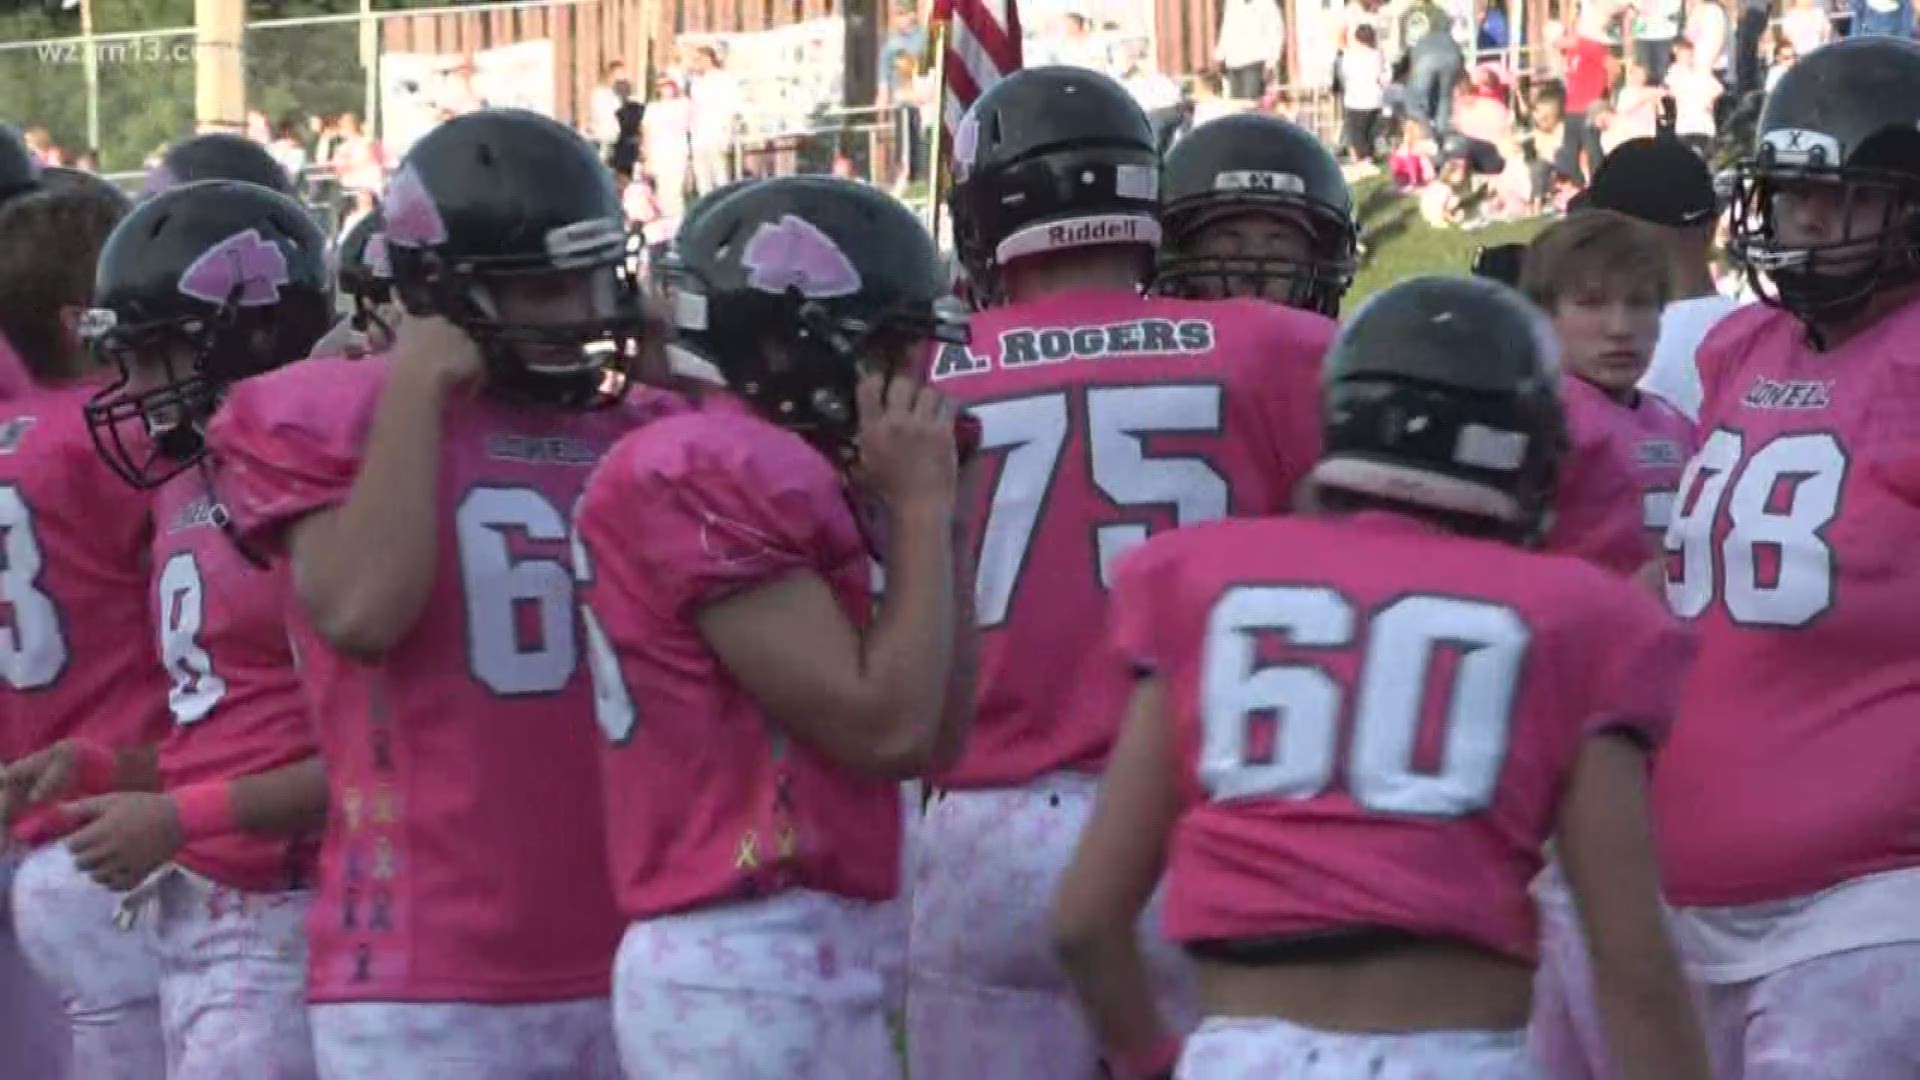 Eleventh annual Pink Arrow game held in Lowell